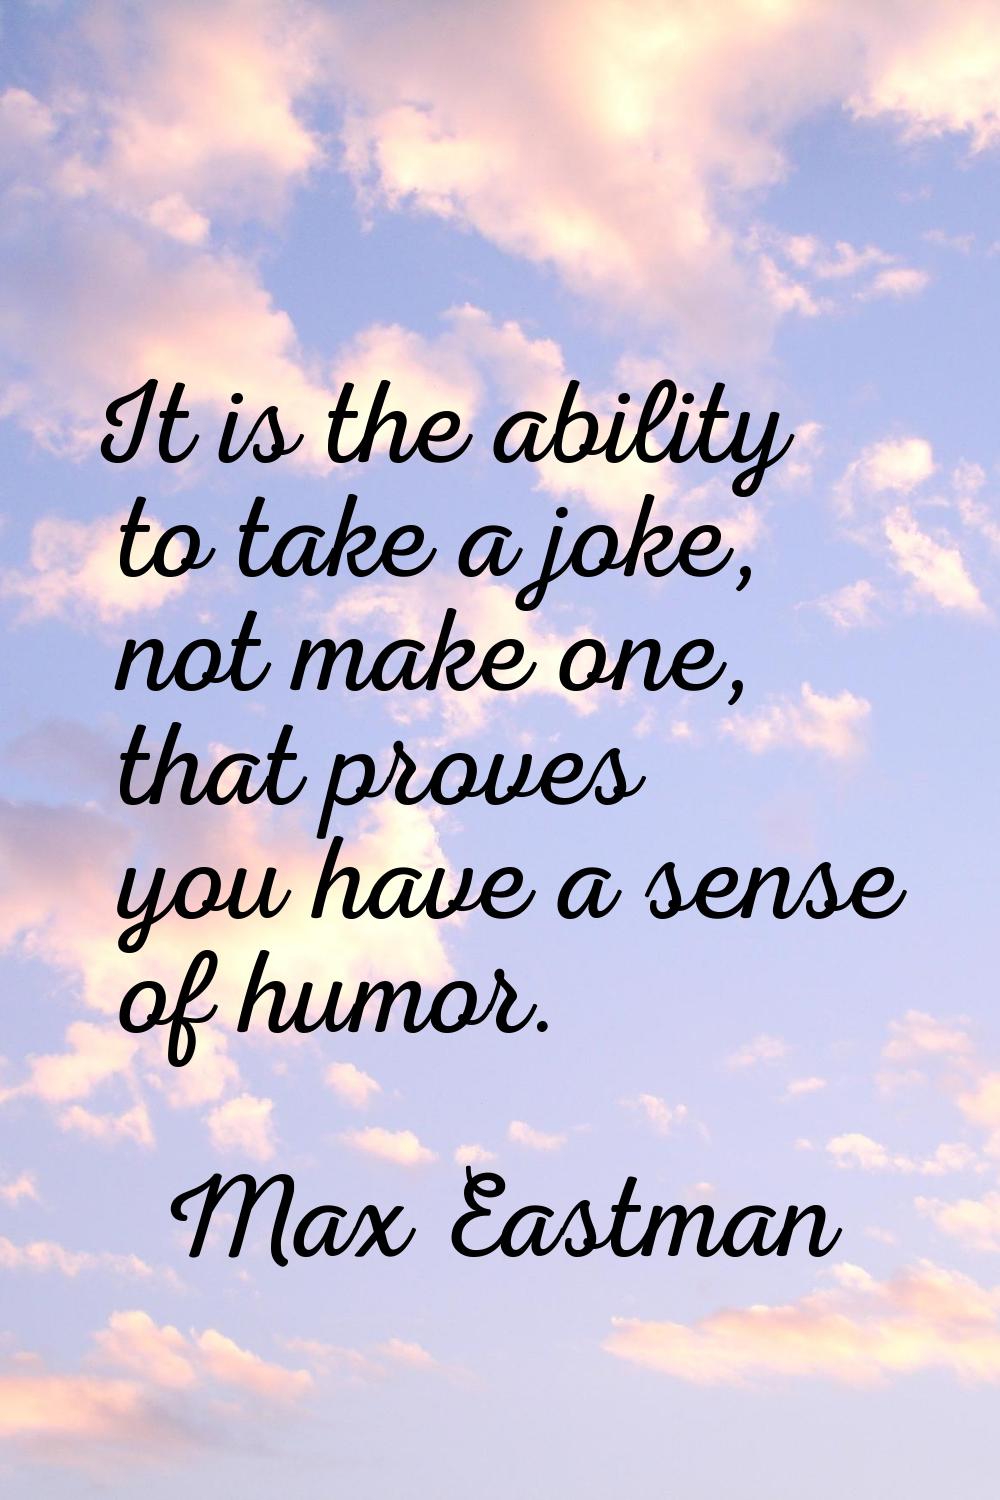 It is the ability to take a joke, not make one, that proves you have a sense of humor.